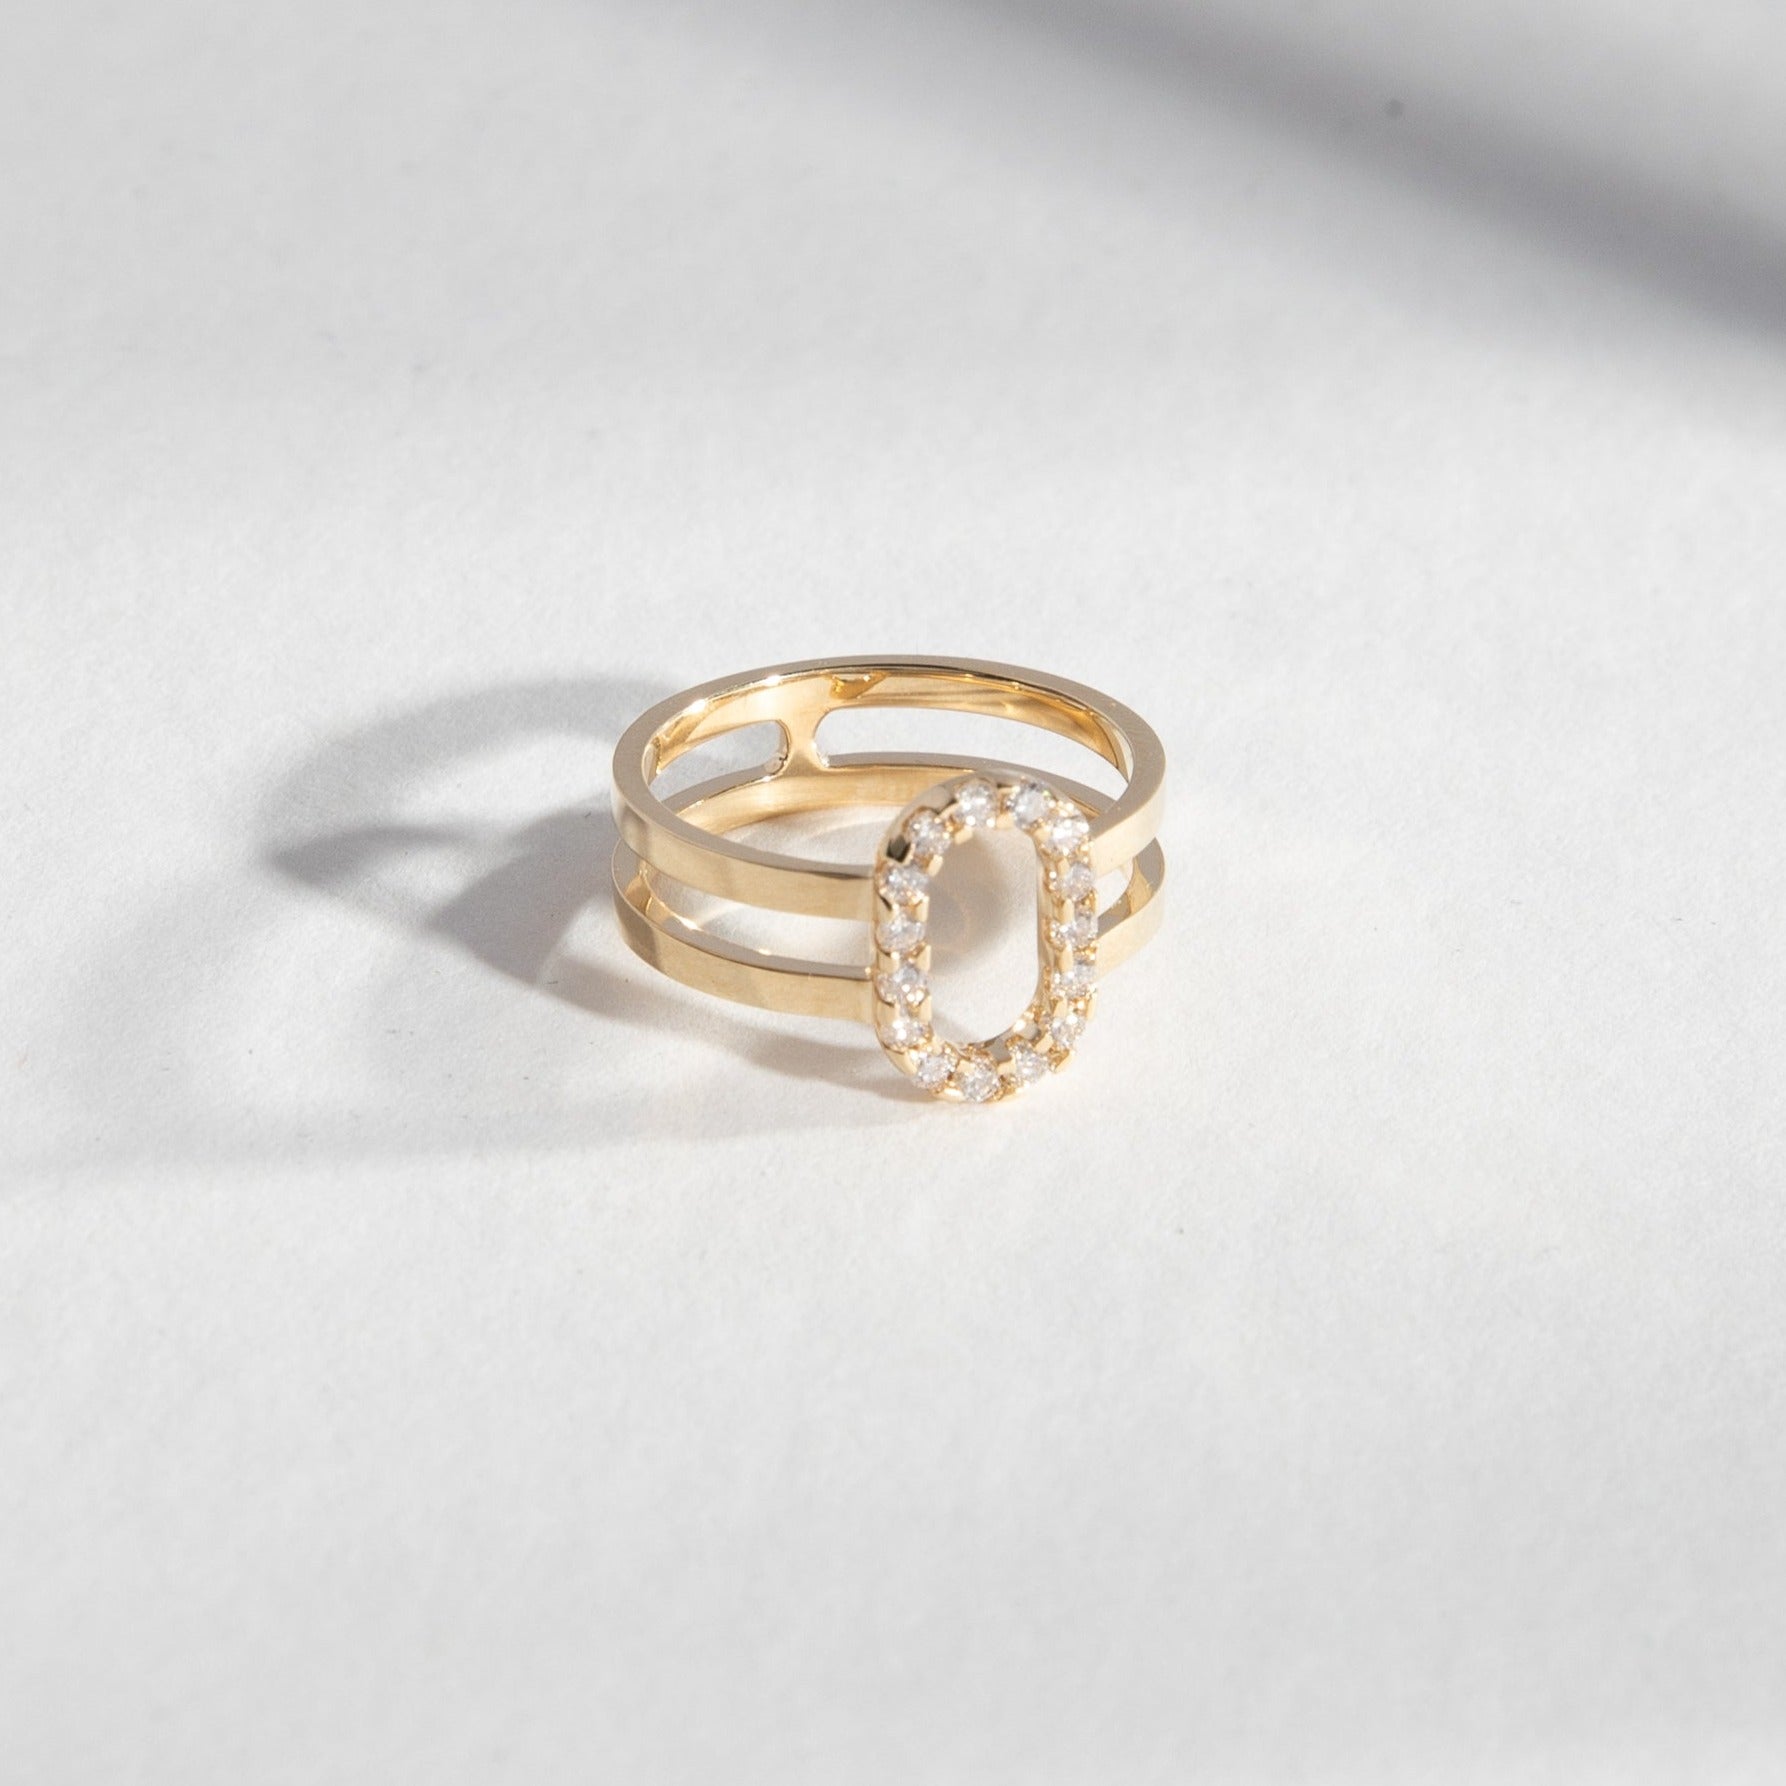 Maiti Alternative Ring in 14k Gold set with lab-grown diamonds By SHW Fine Jewelry NYC